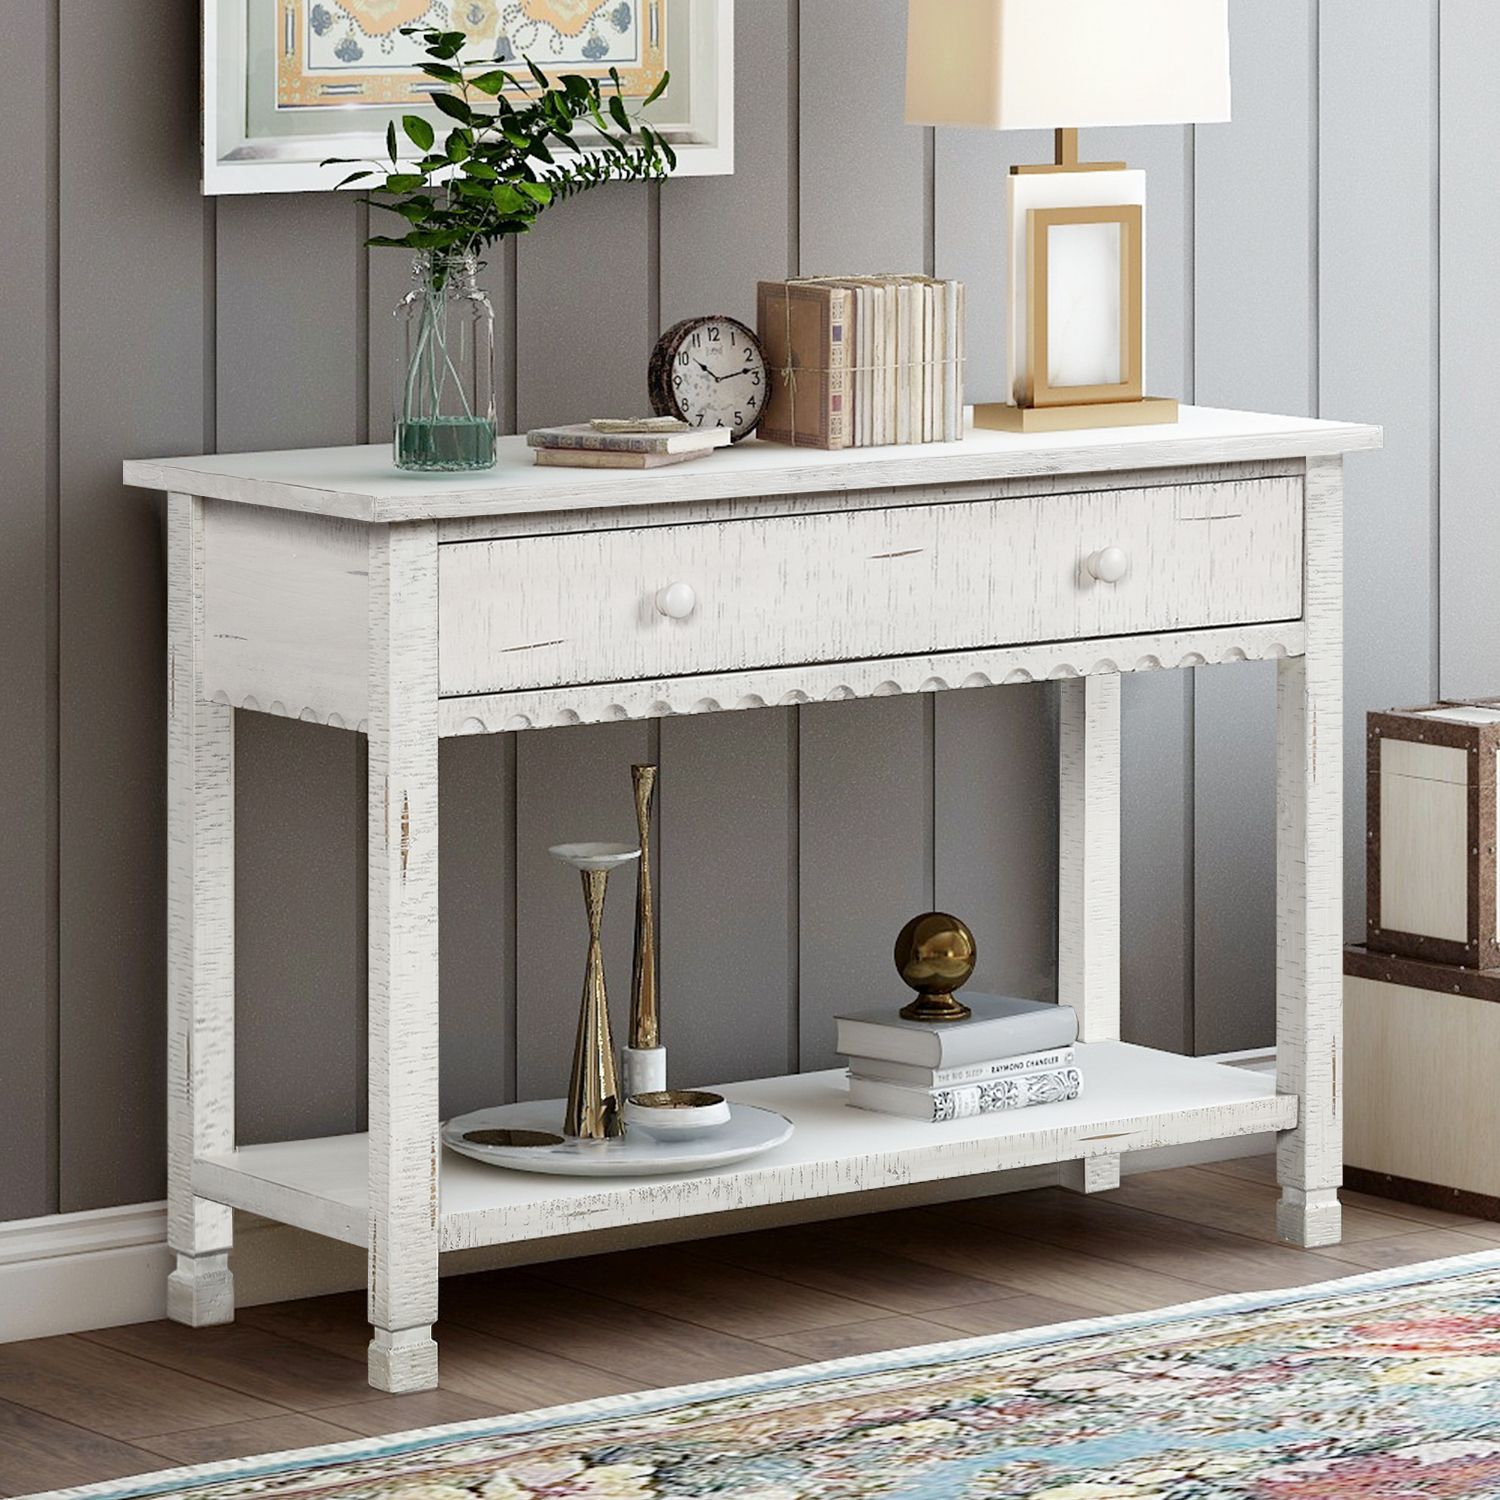 Console Sofa Table With Drawers, Btmway Wooden Rustic Narrow Entrance Throughout White Triangular Console Tables (View 1 of 20)